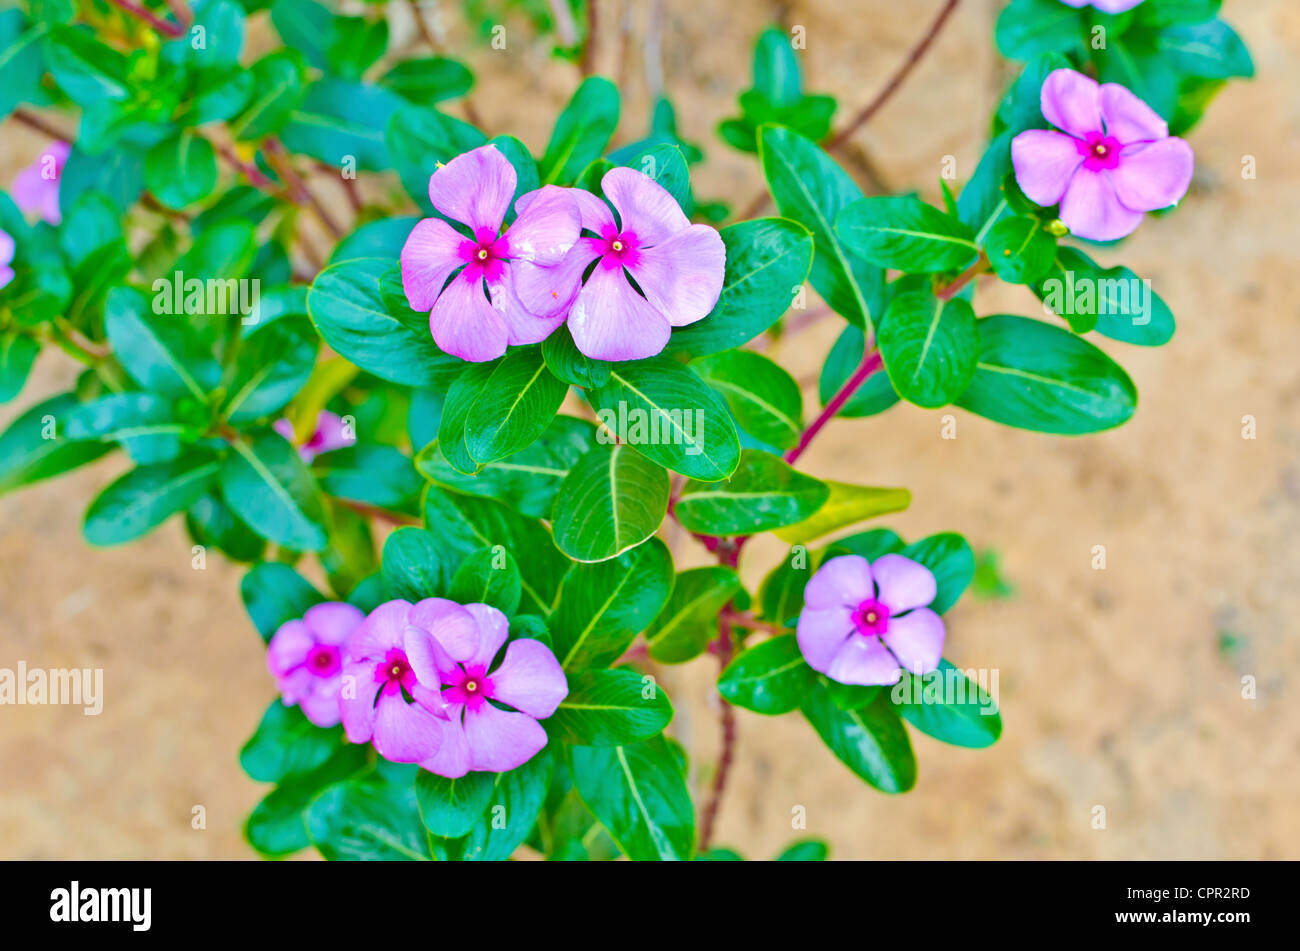 Impatiens Walleriana High Resolution Stock Photography And Images Alamy